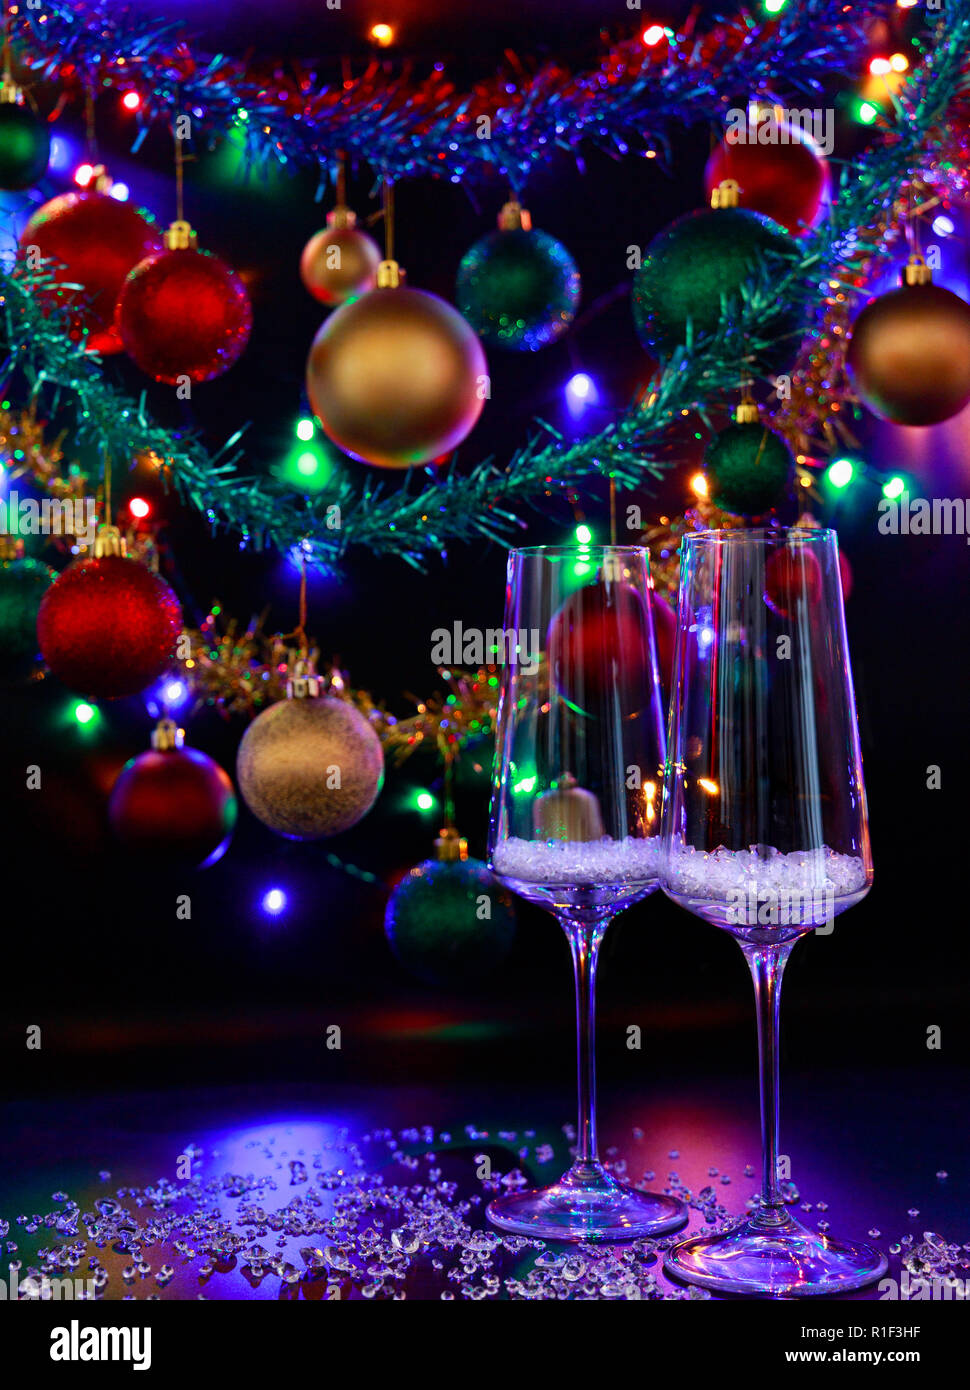 Two champagne glasses against a background of colorful Christmas decorations and Christmas lights. Stock Photo